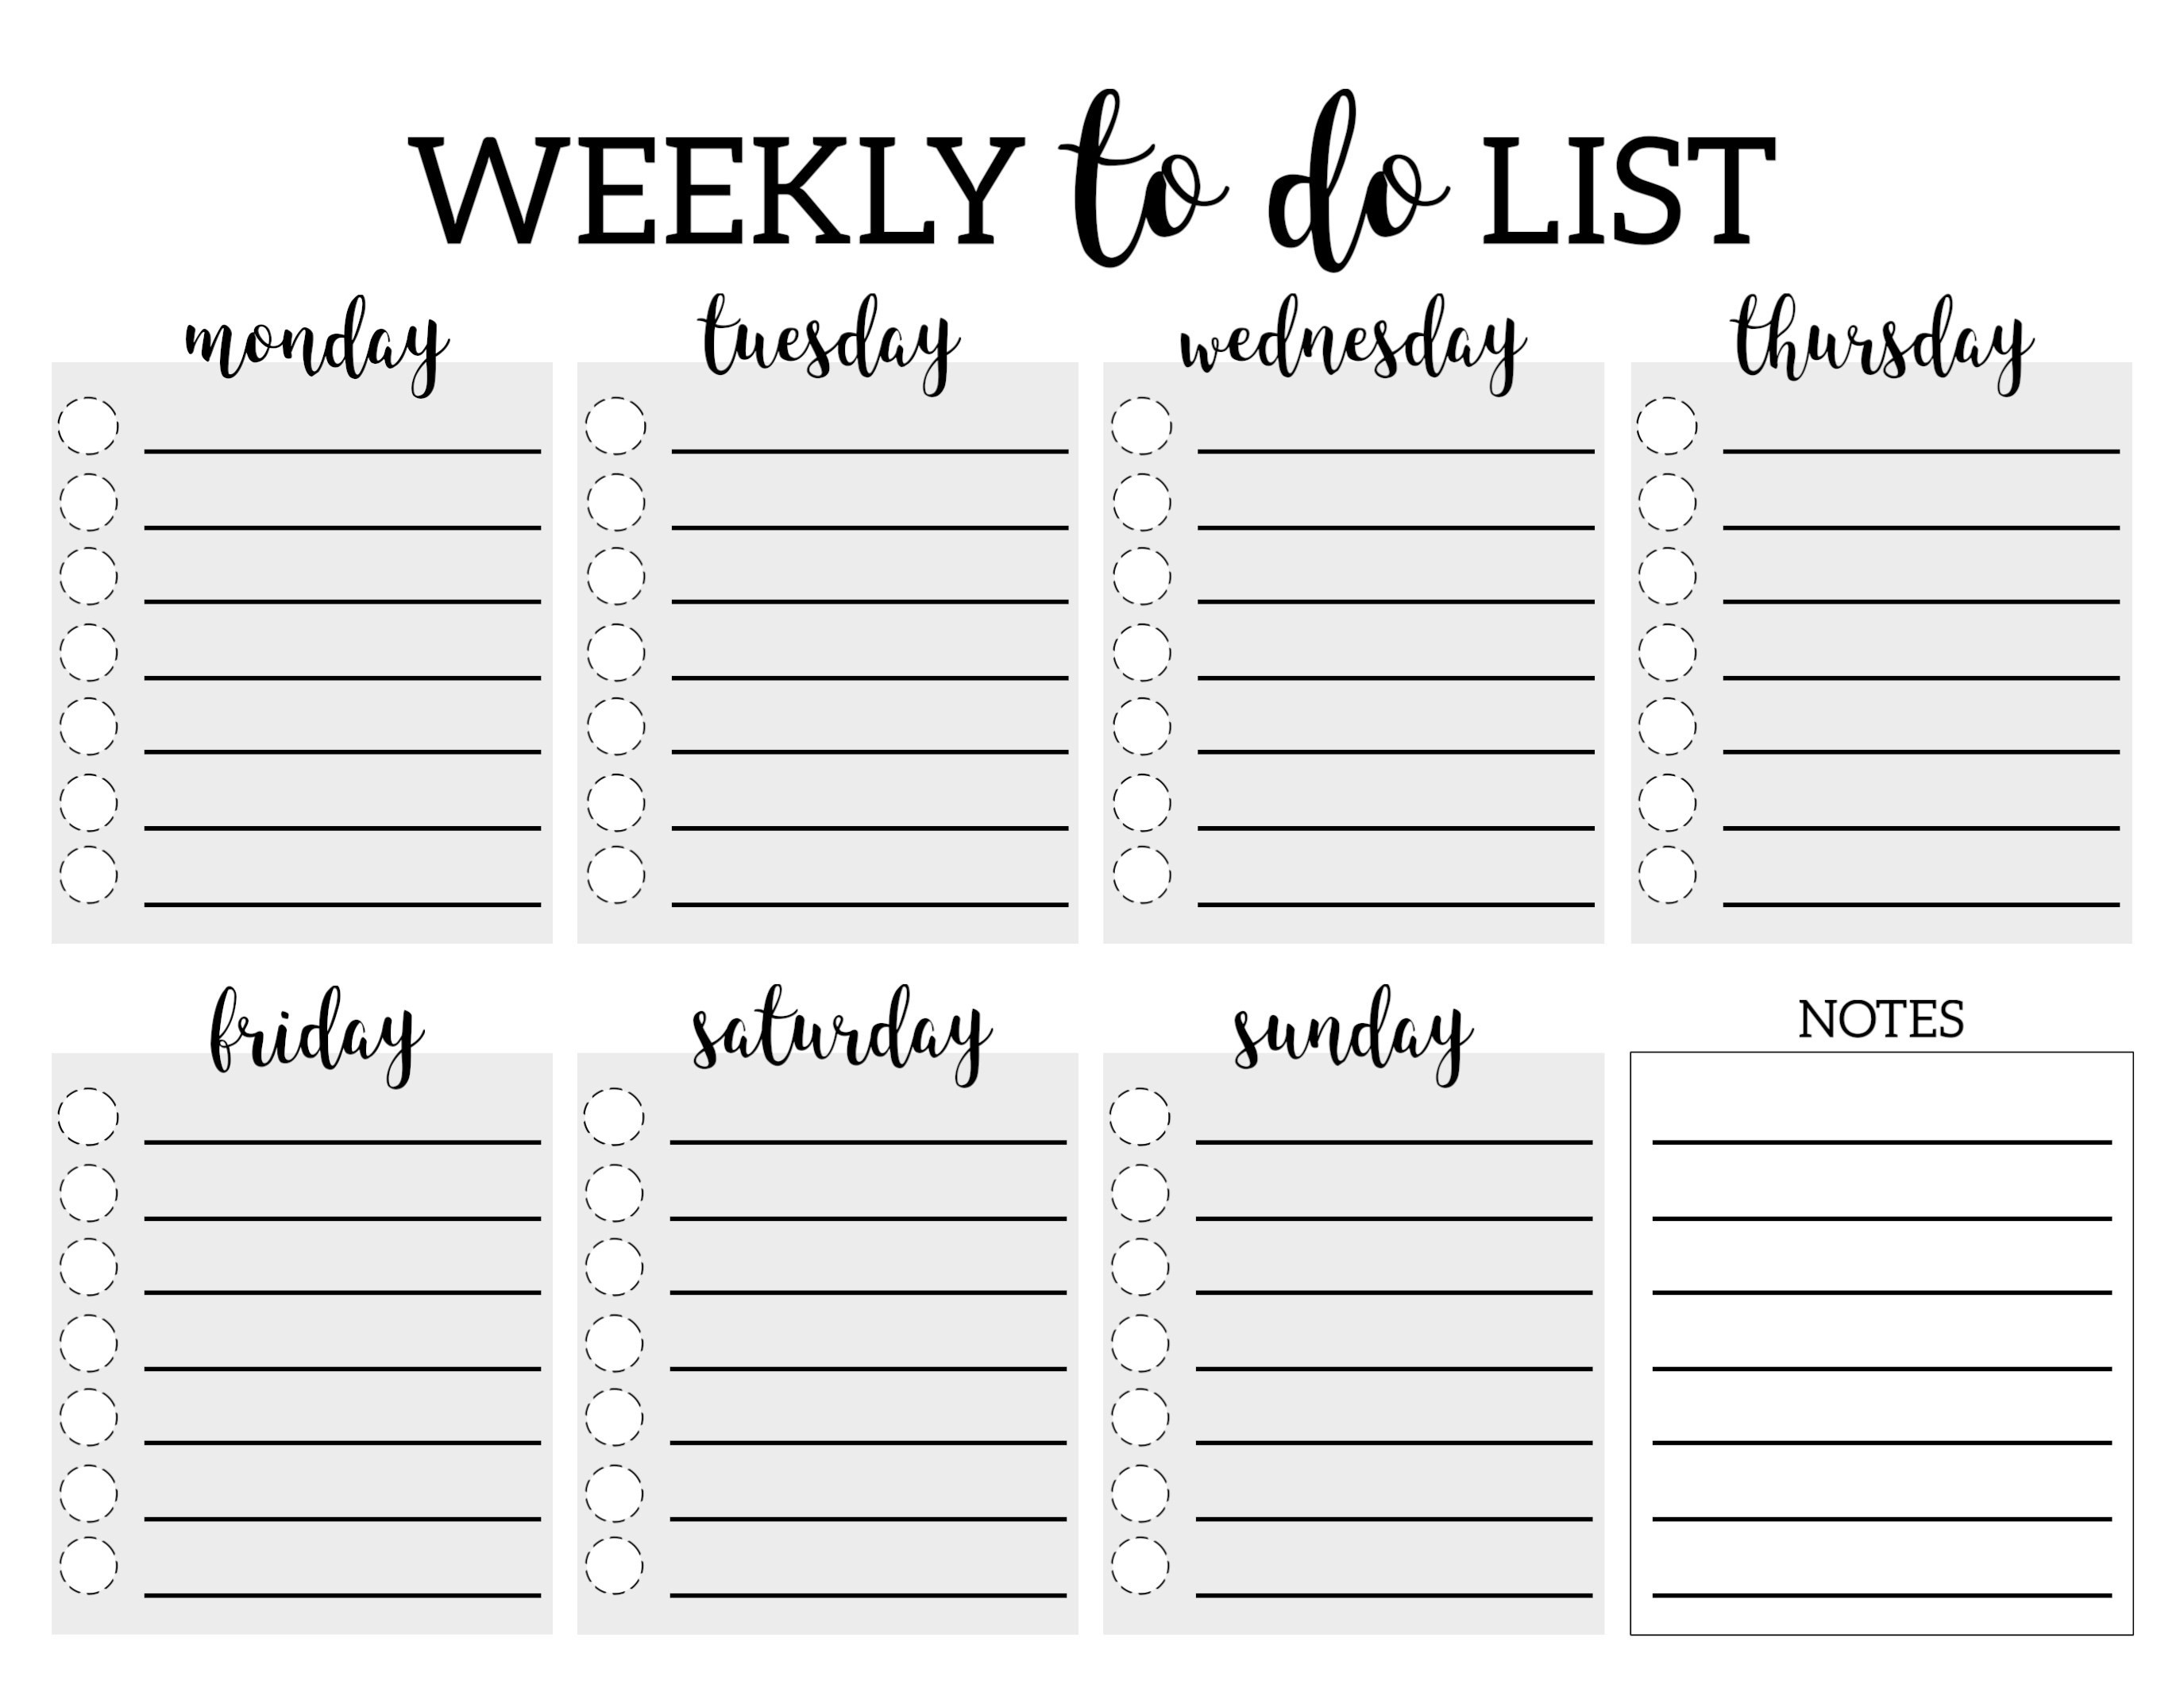 Weekly To Do List Printable Checklist Template – Paper Trail Design - Weekly To Do List Free Printable